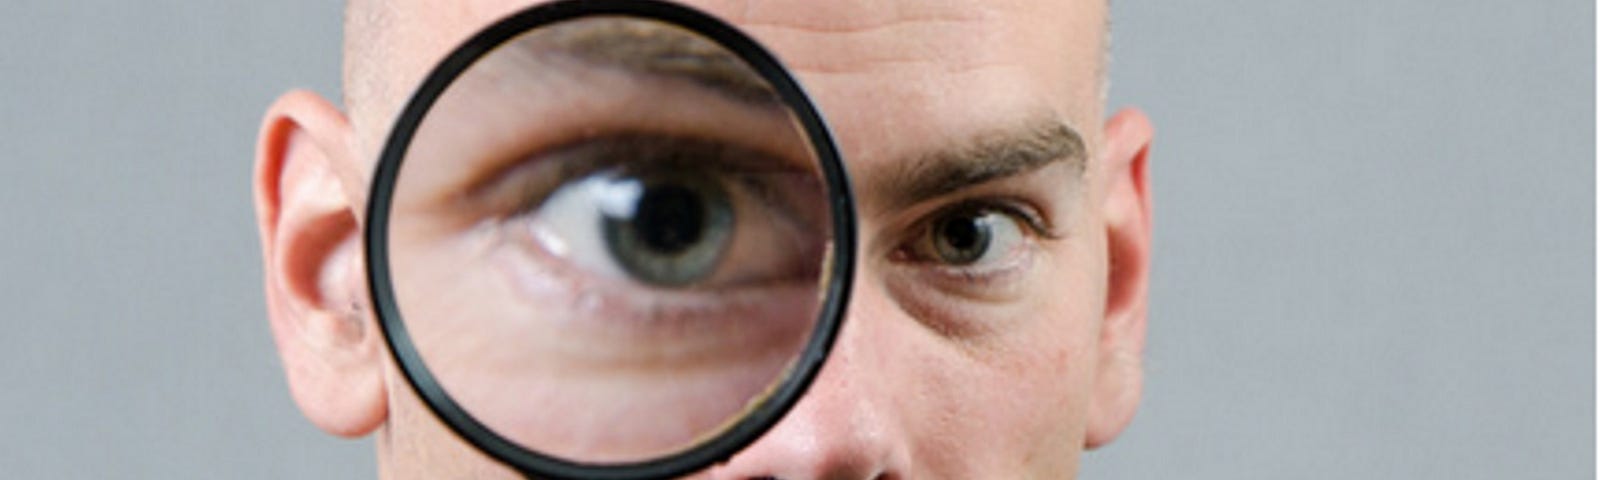 White male looking through magnifying glass